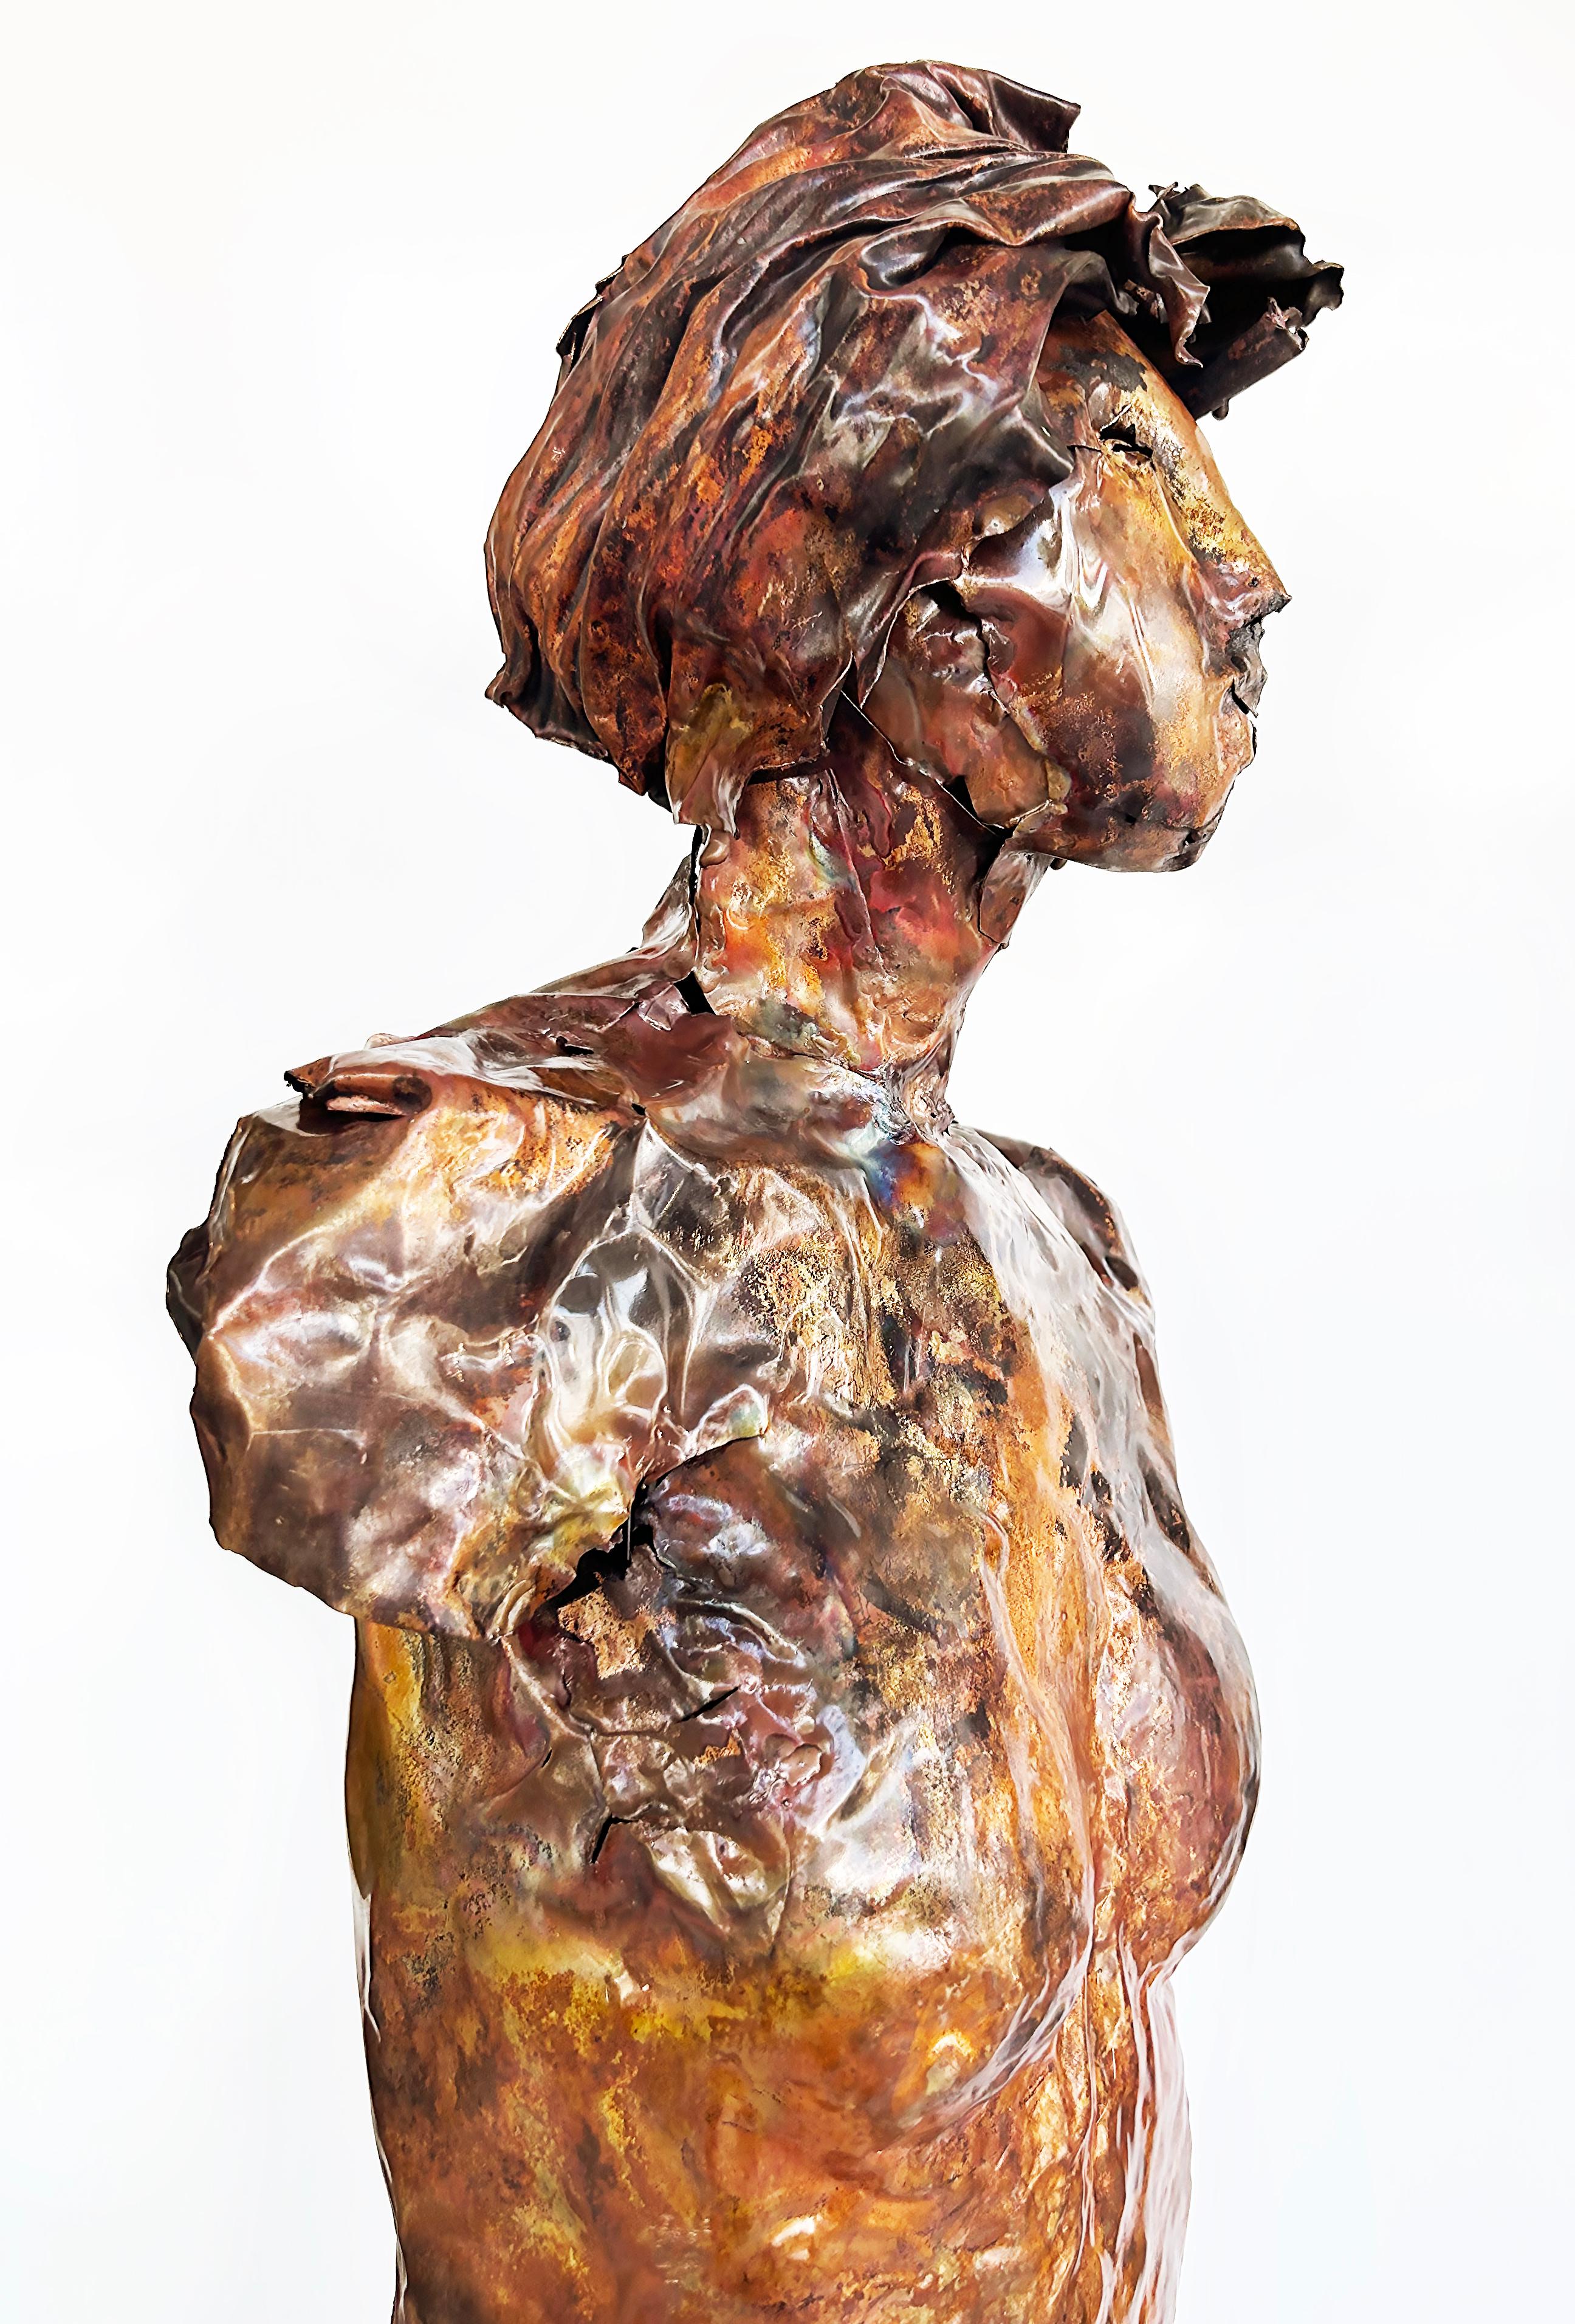 Hand-Crafted Life-Size Figurative Copper Statue Sculpture by Davis Murphy